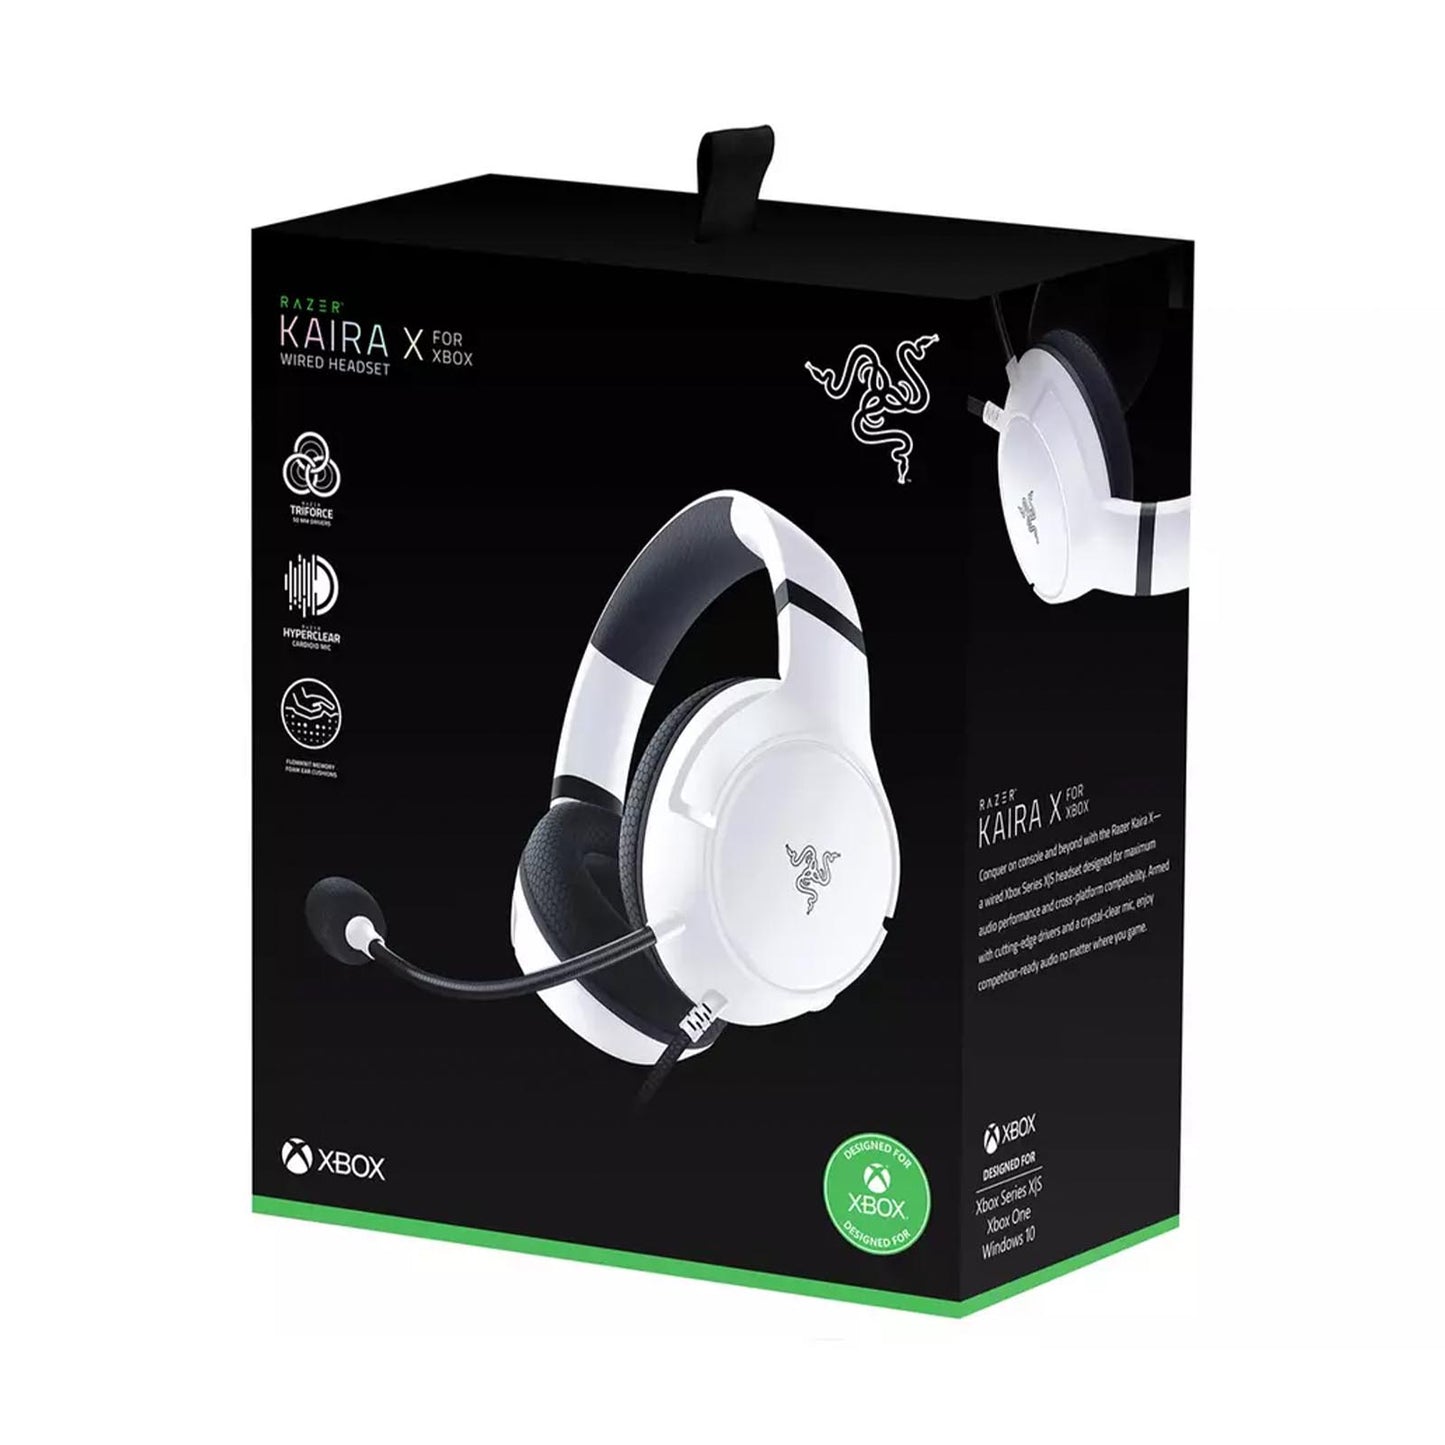  Razer Kaira X Wired Headset for Xbox Series XS, Xbox One, PC,  Mac & Mobile Devices: Triforce 50mm Drivers - HyperClear Cardioid Mic -  Flowknit Memory Foam Ear Cushions - On-Headset